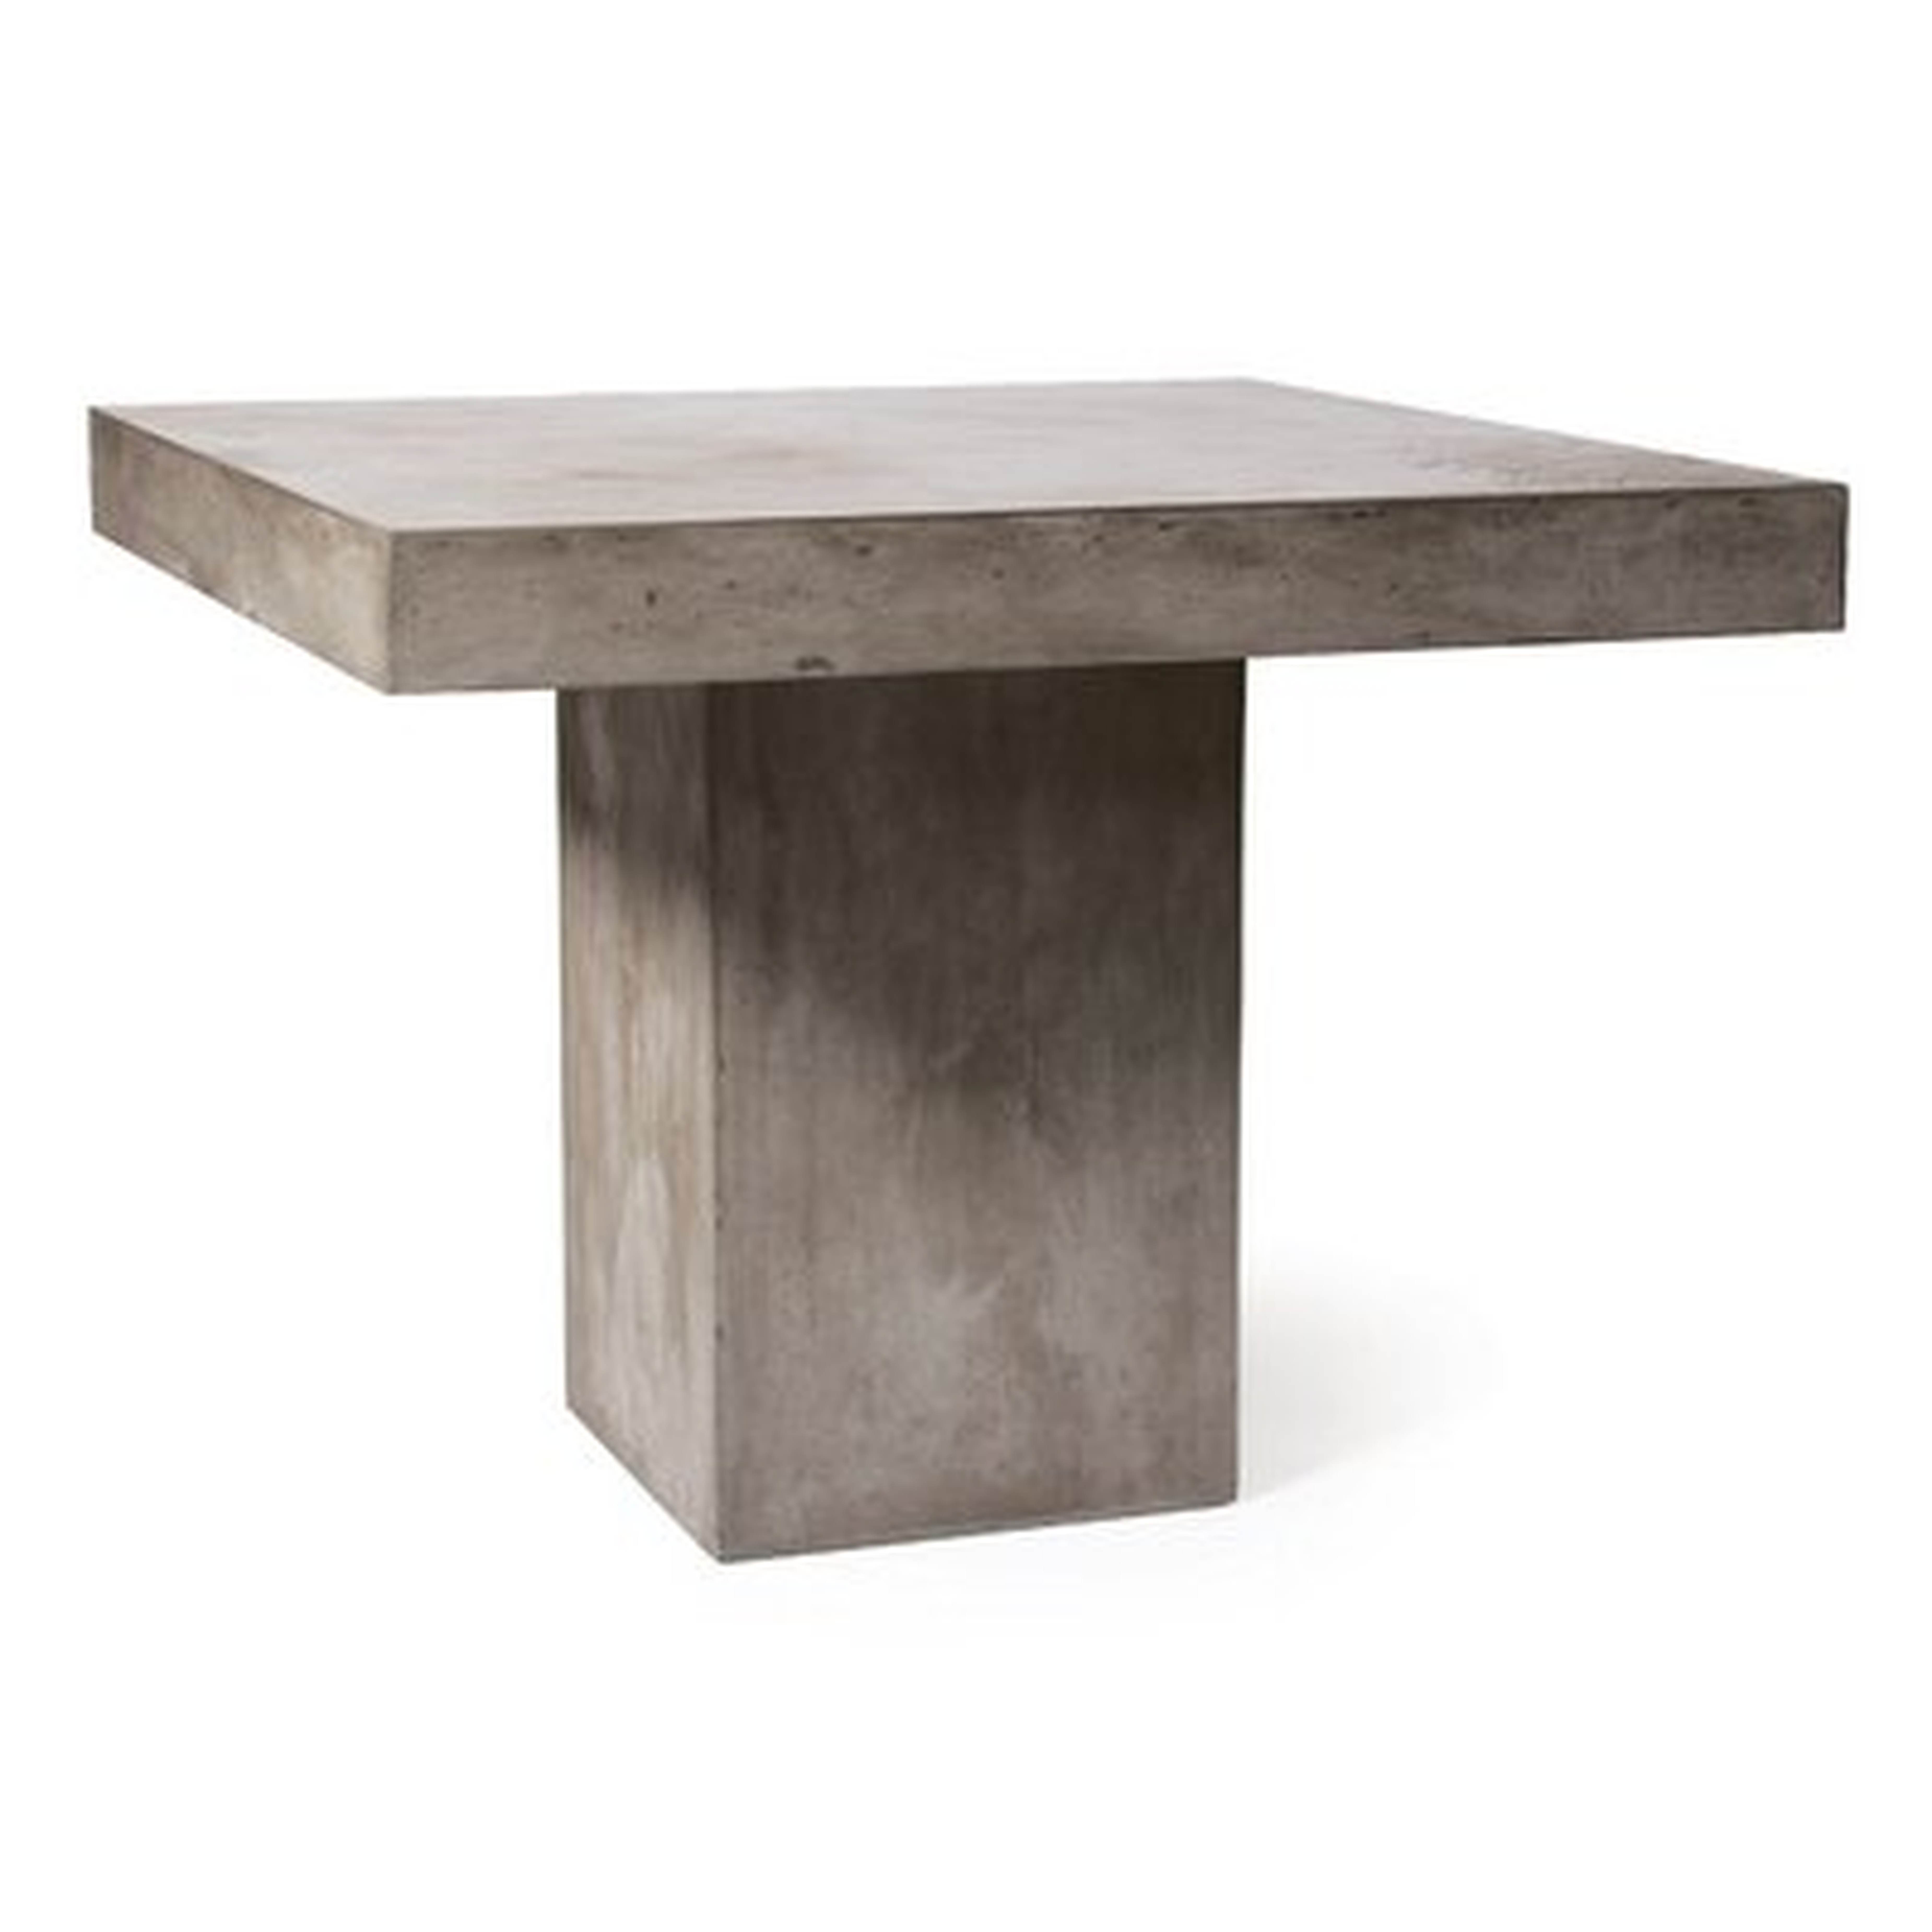 Perpetual Provence Stone/Concrete Dining Table - AllModern